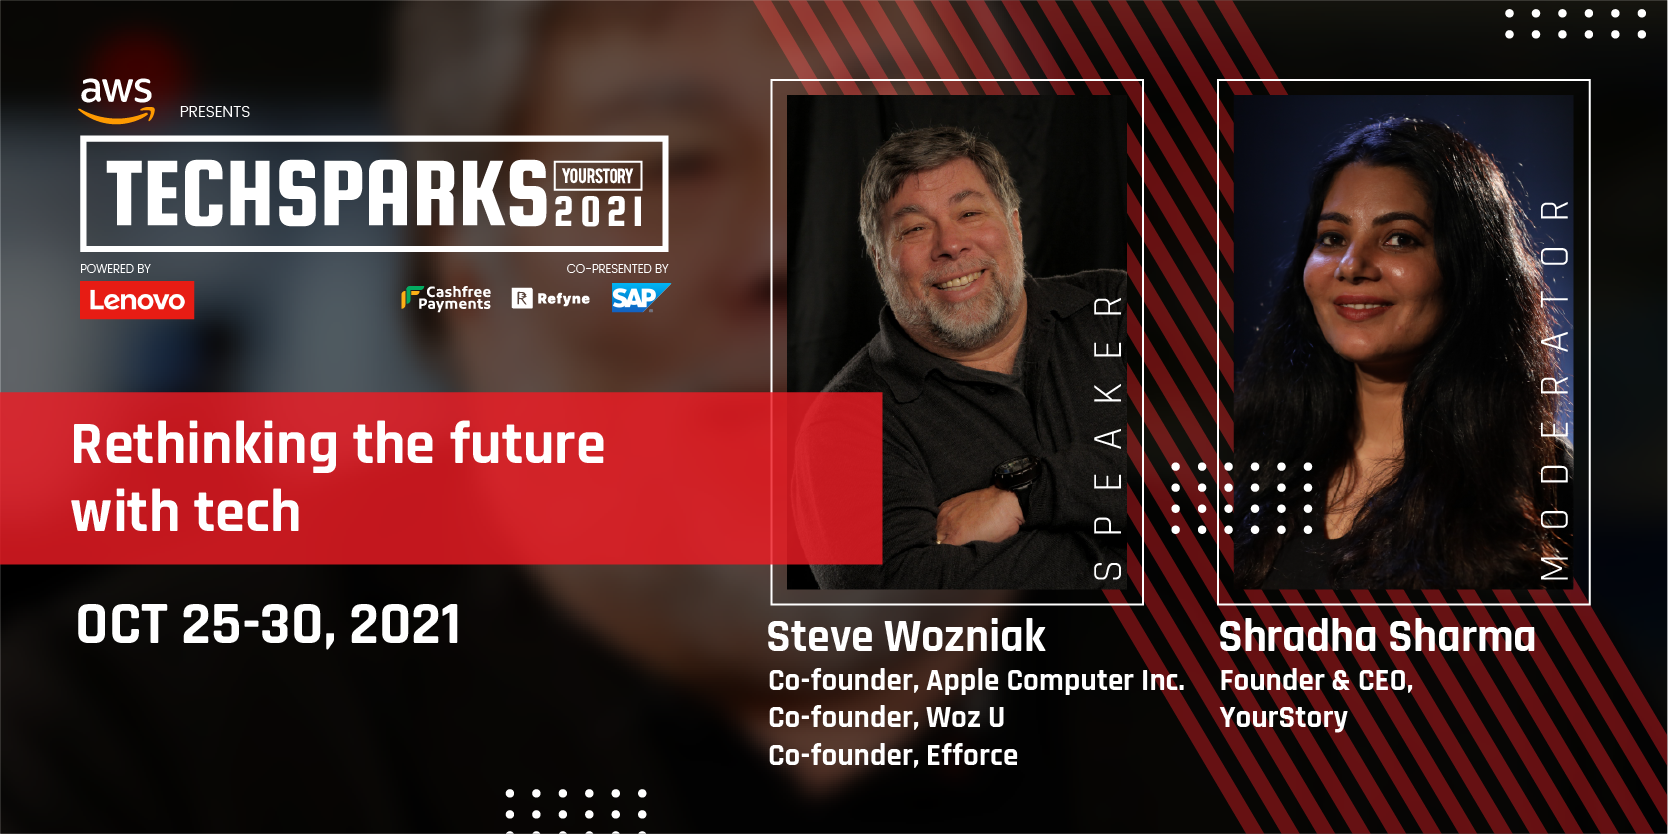 Meet Steve 'The Woz' Wozniak at TechSparks 2021, India's largest startup-tech conference 
